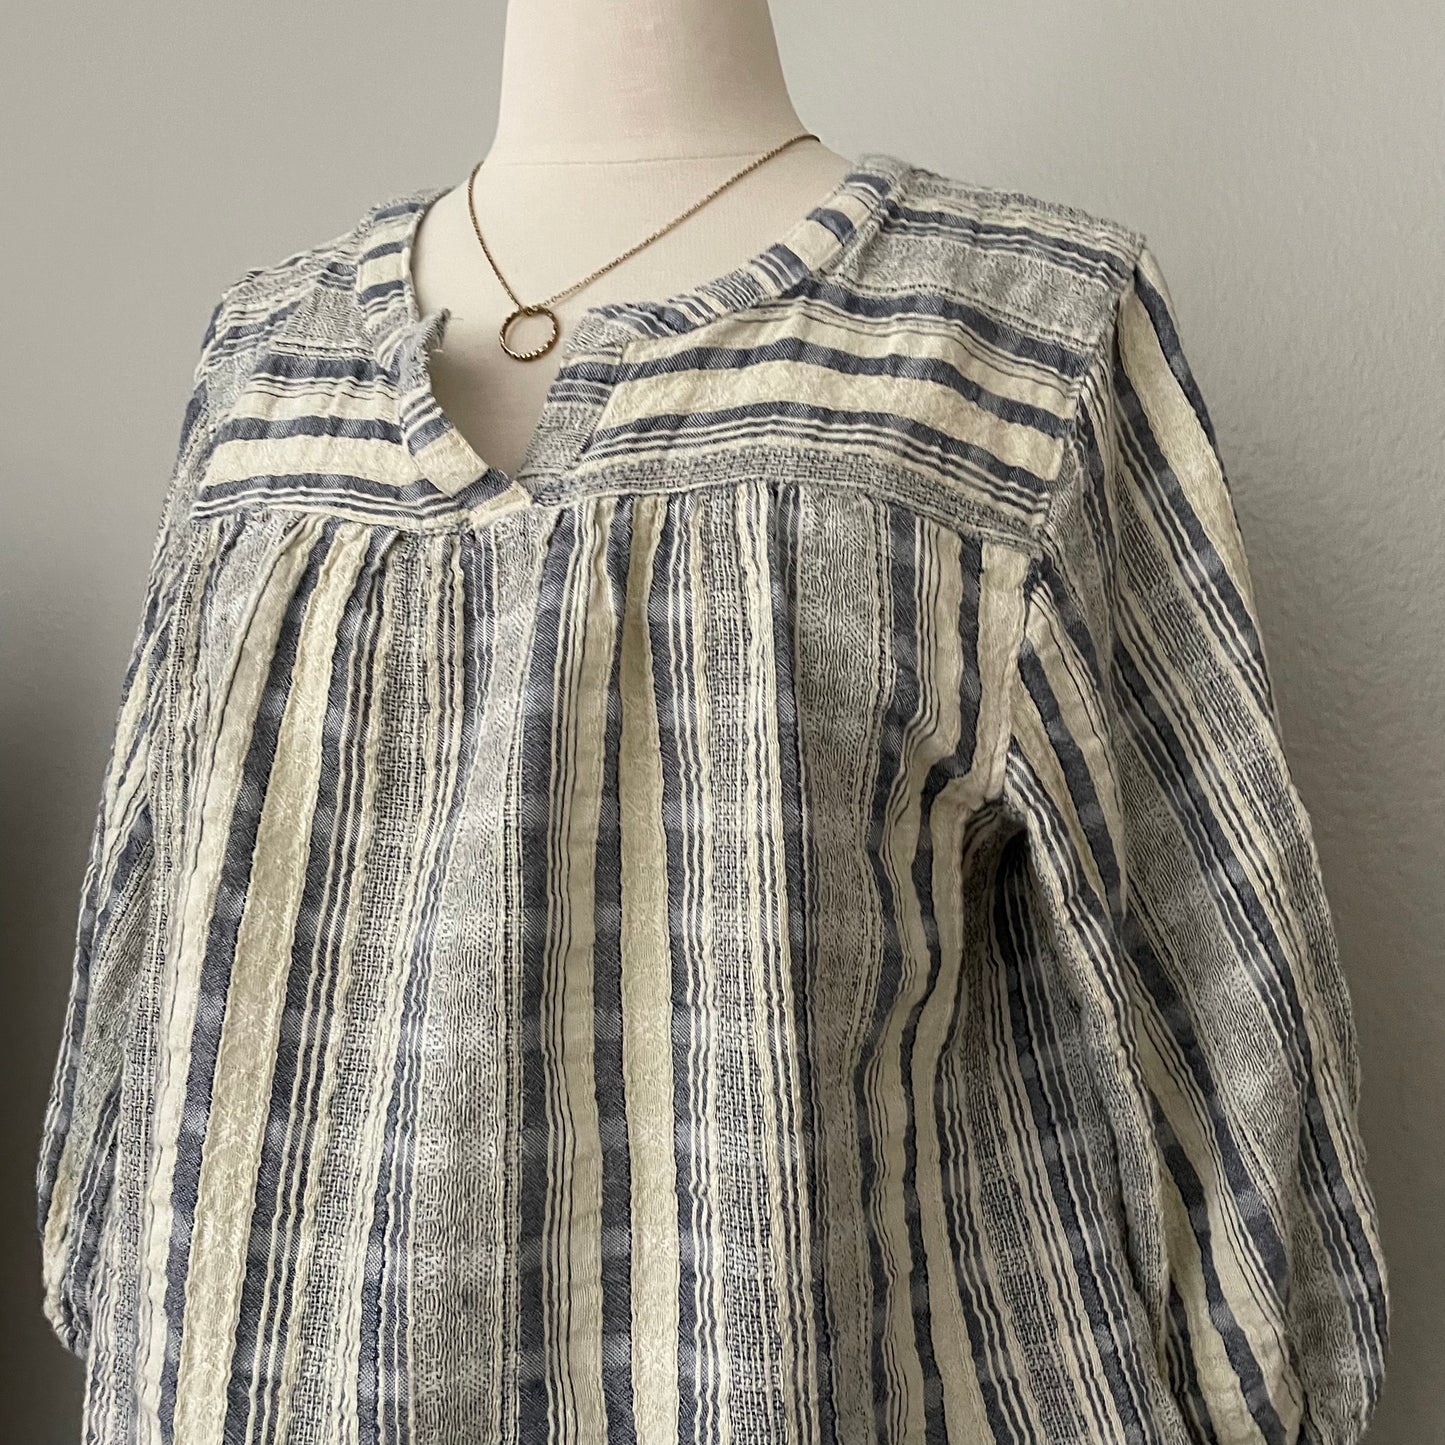 Structured Squared Peasant Style Top (L)